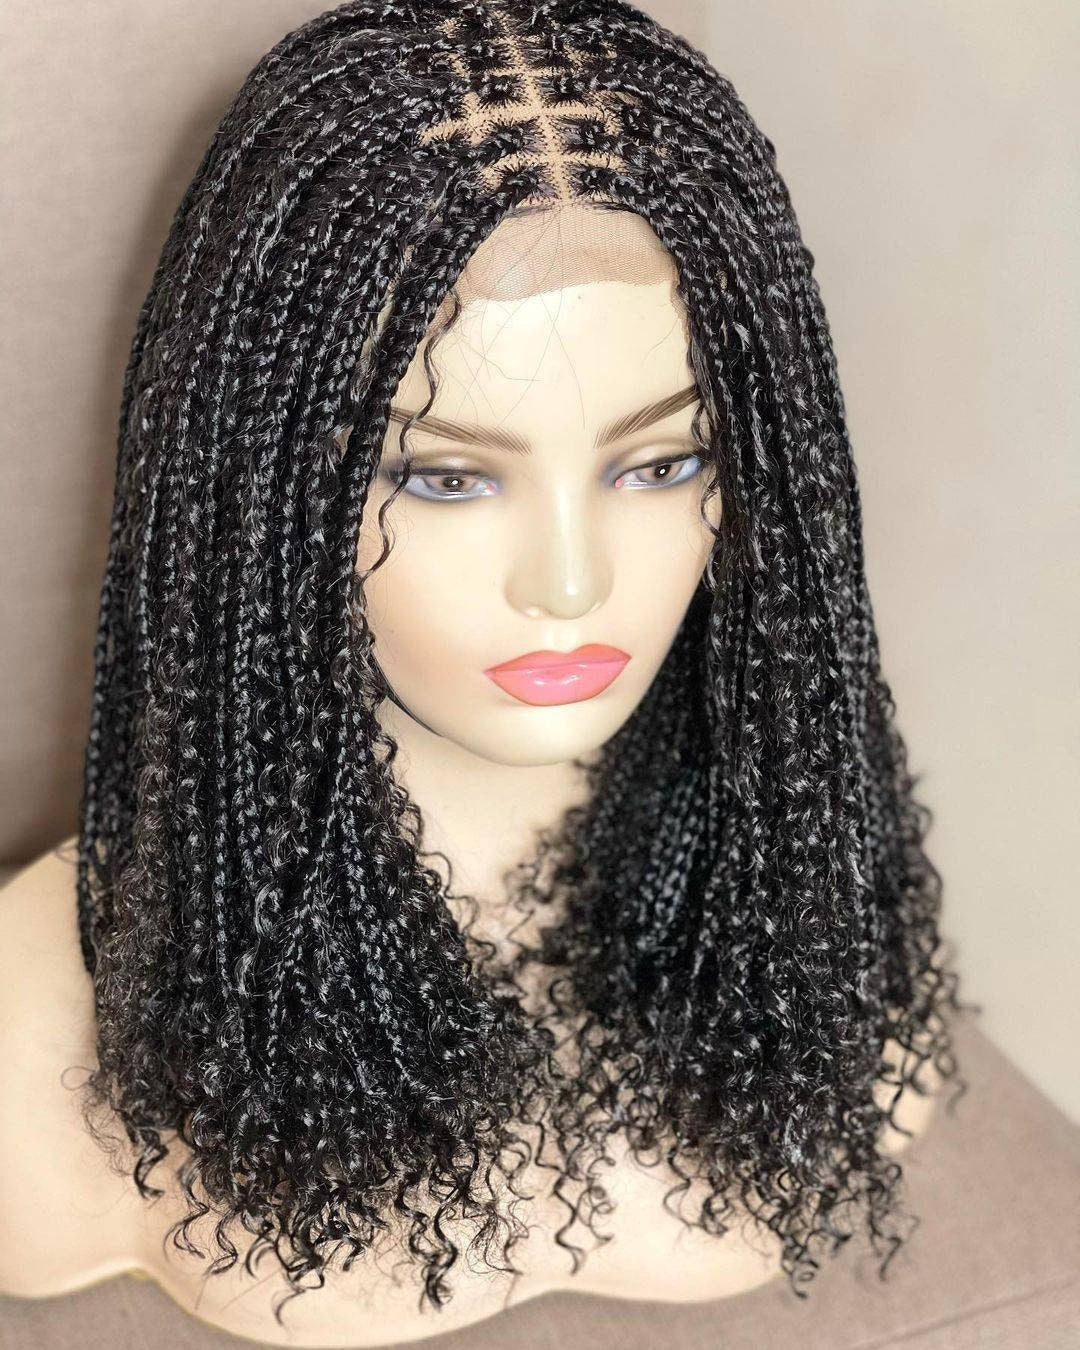 Boho Knotless Braided Wig with Lace Front & Full Lace Braided Box Braid Wig for Black Women - Ready to Ship Handmade Glueless Braids Wig